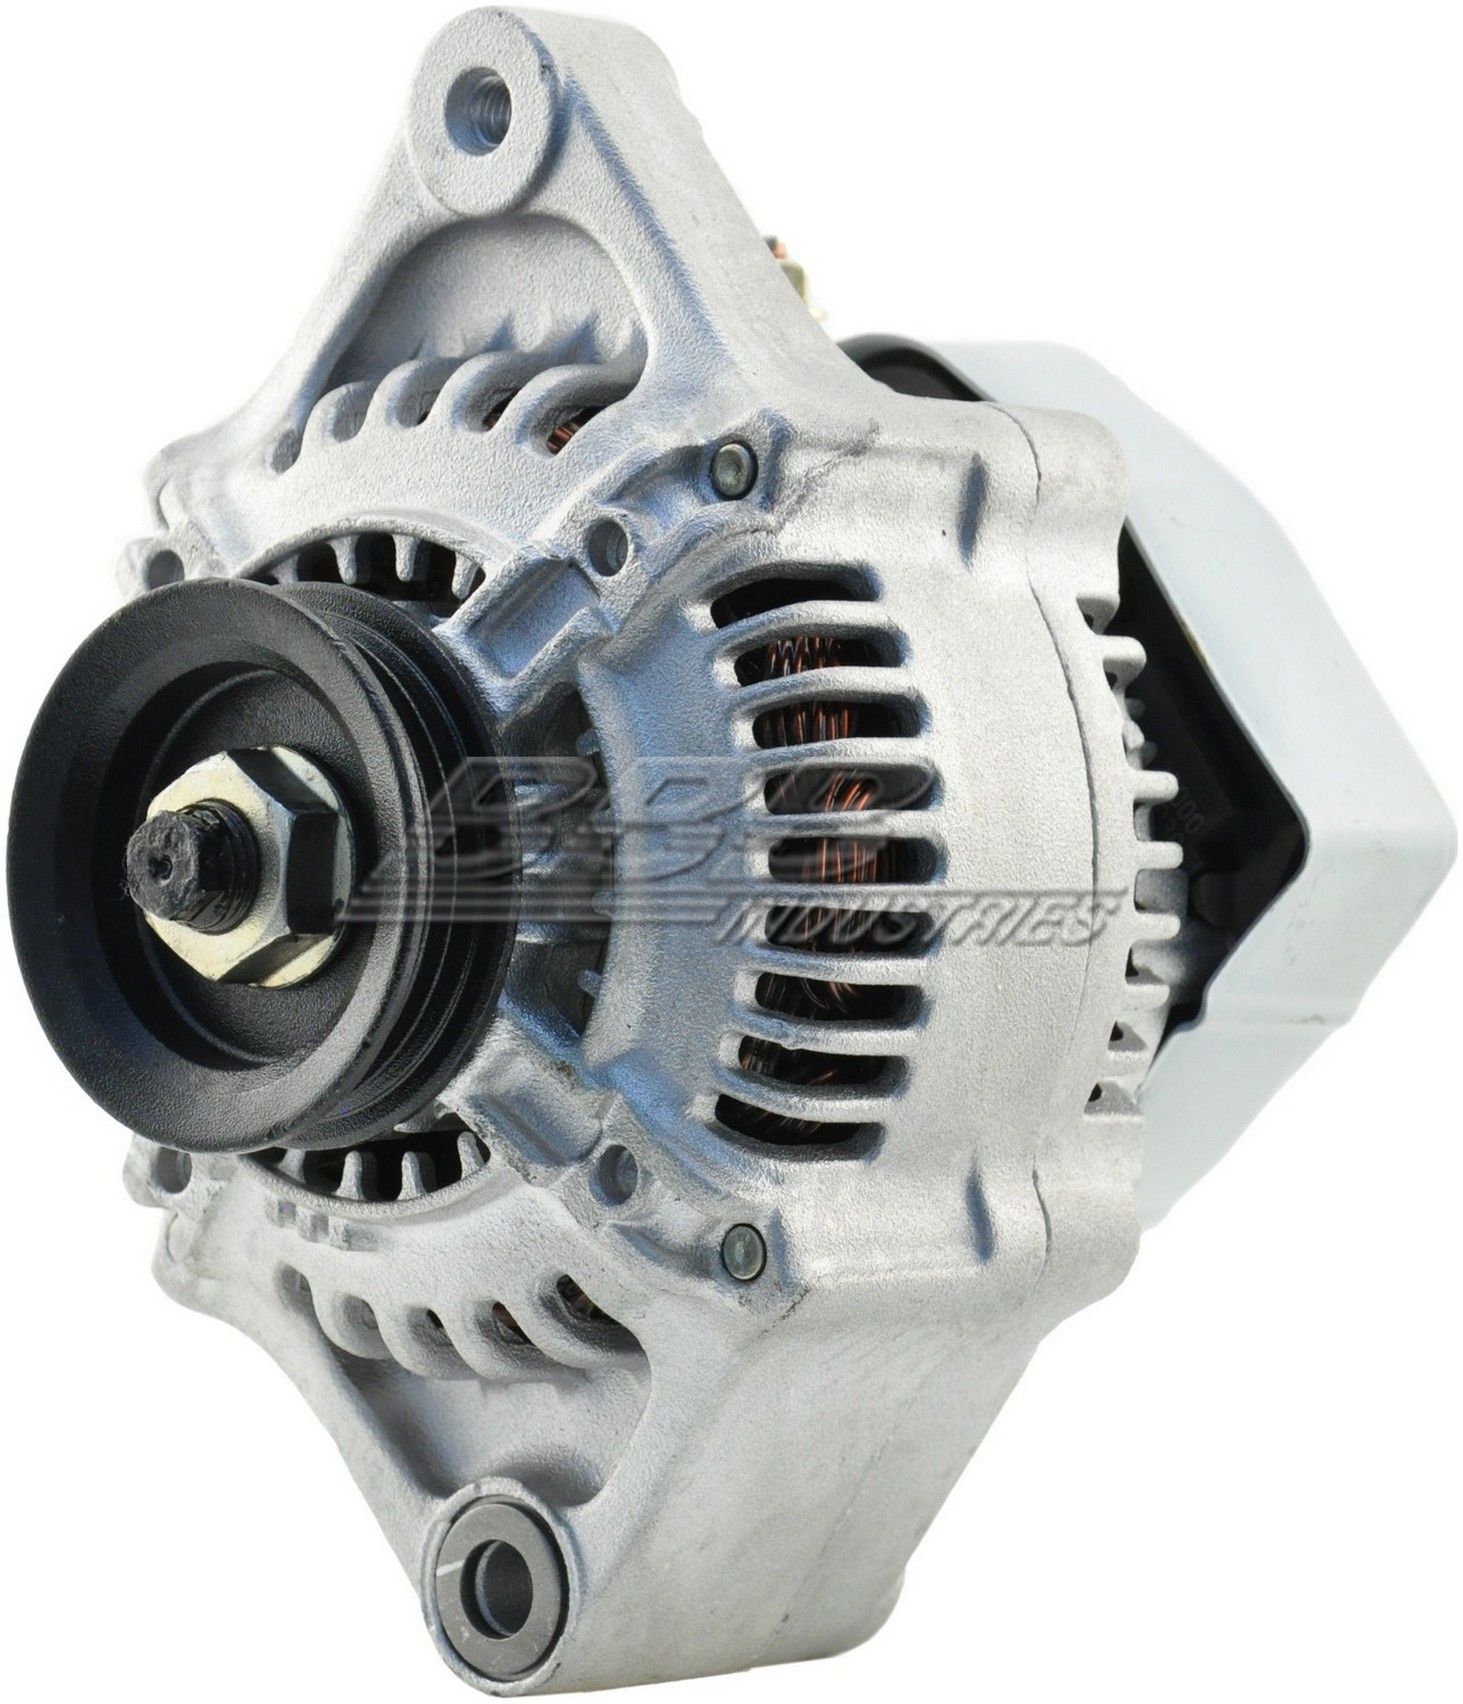 Details about   For Alfa Romeo 164 91-92 ACDelco 334-1837 Professional Remanufactured Alternator 